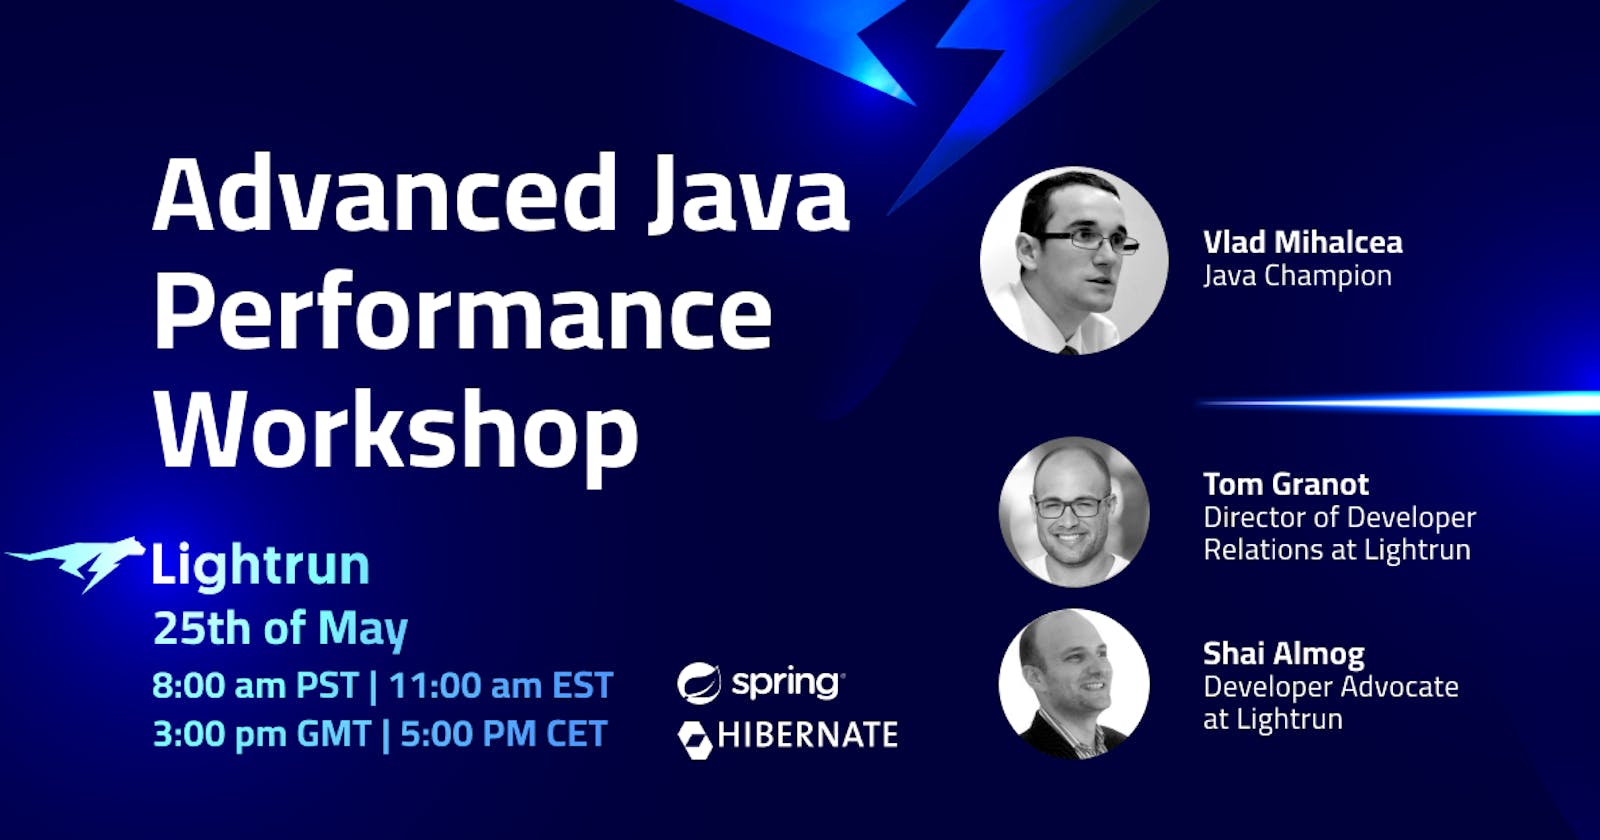 Spring Boot Performance Workshop with Vlad Mihalcea